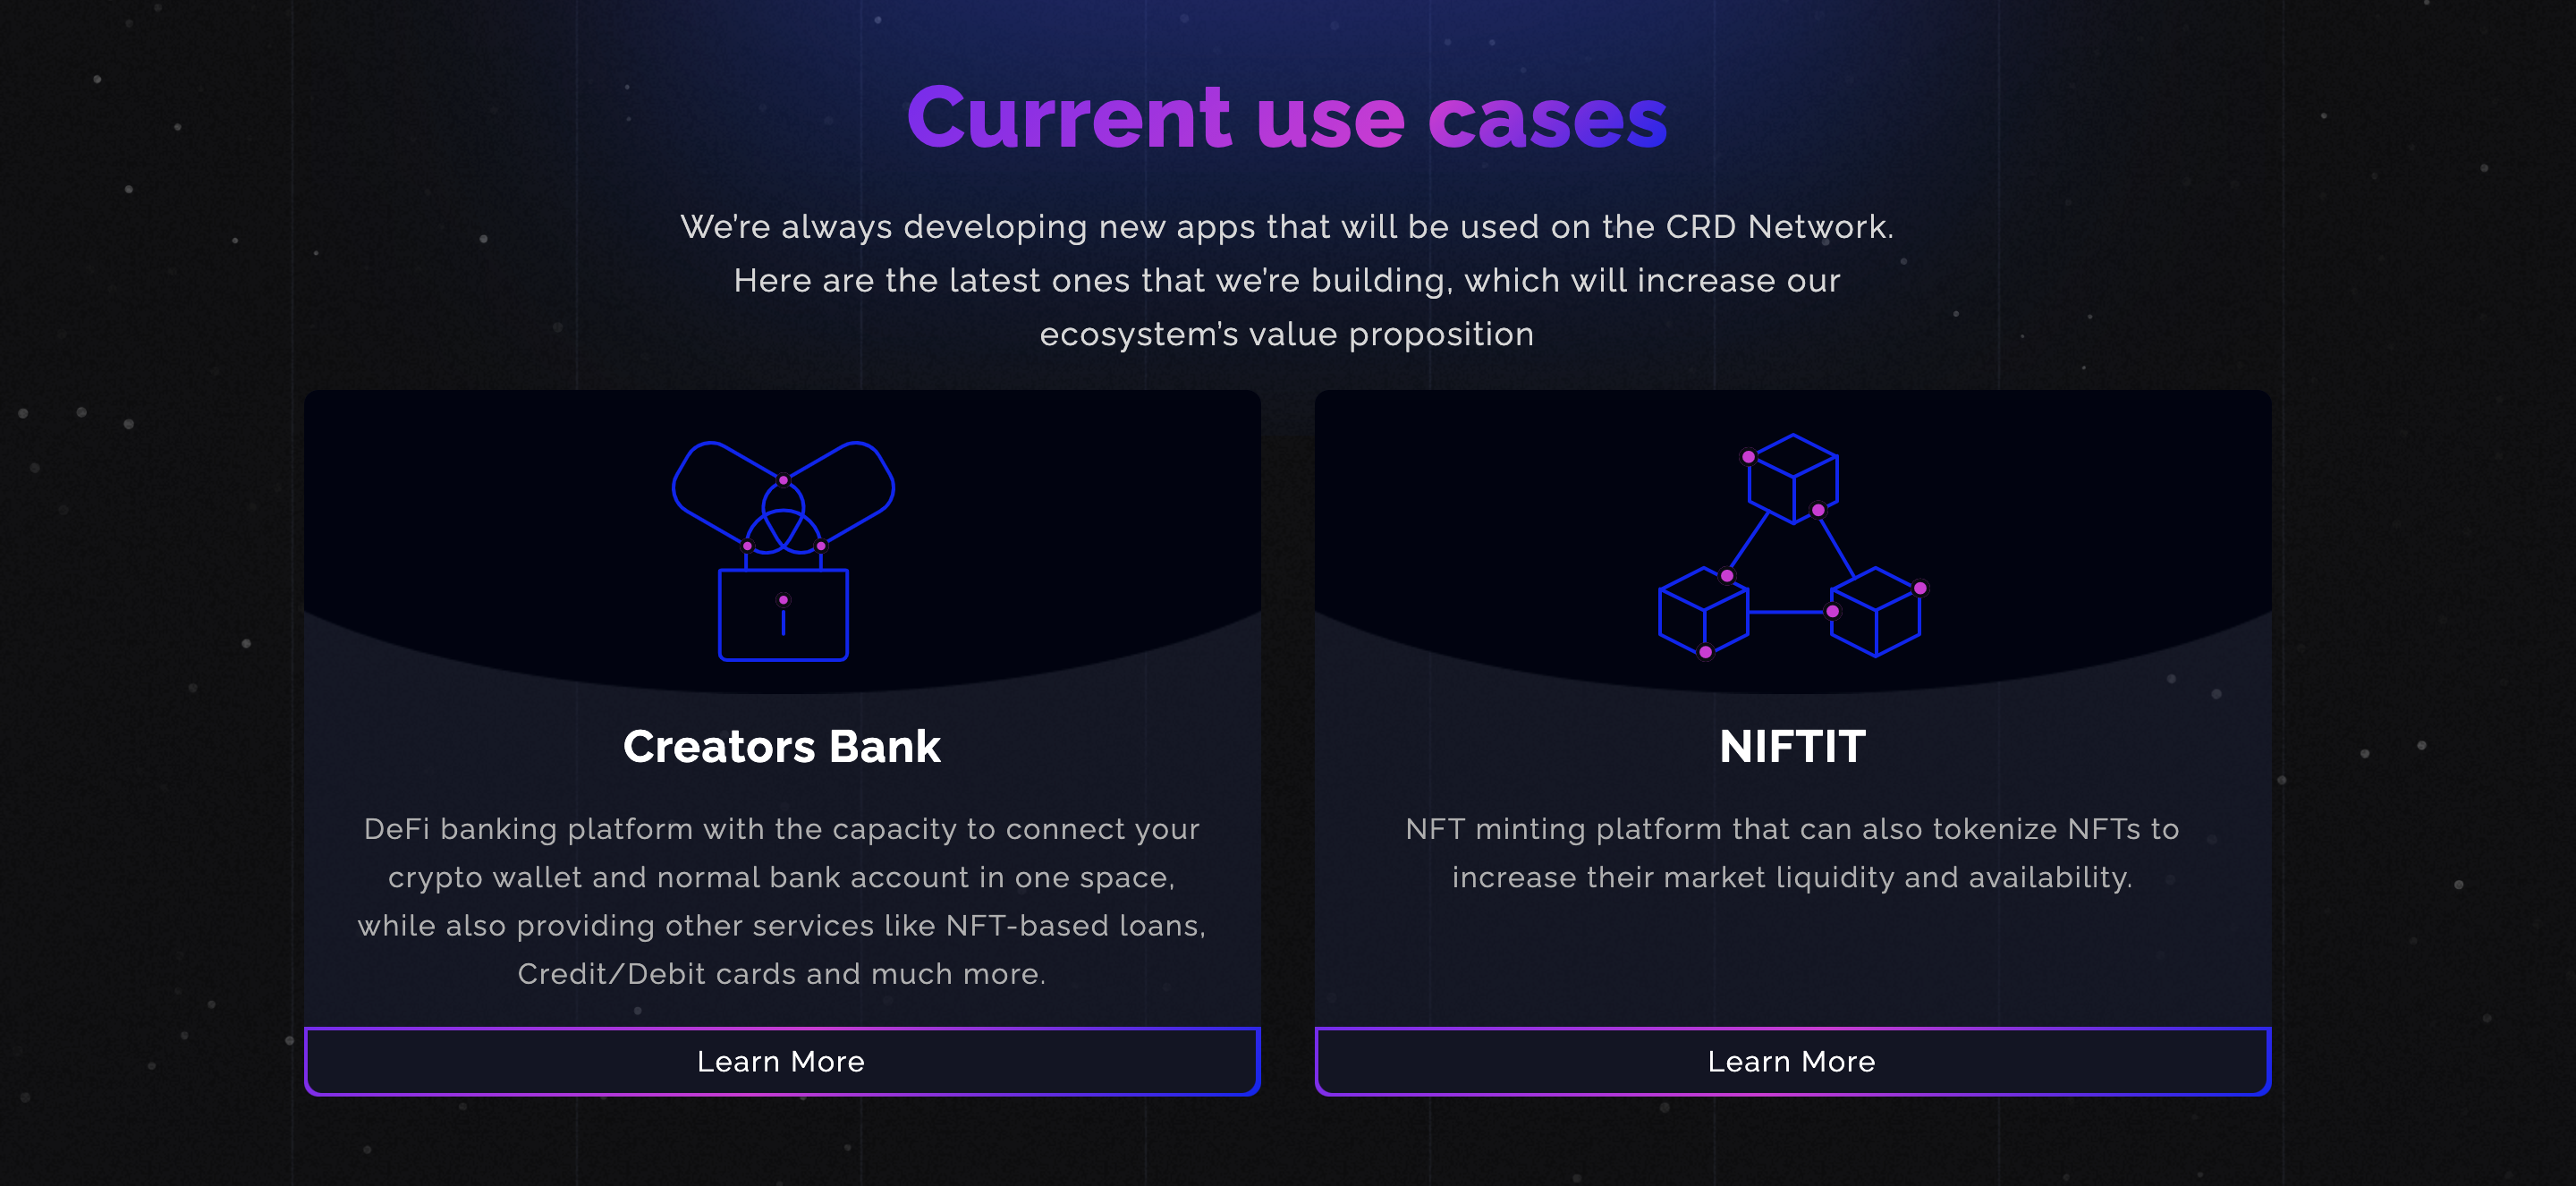 CRD Network Use Cases